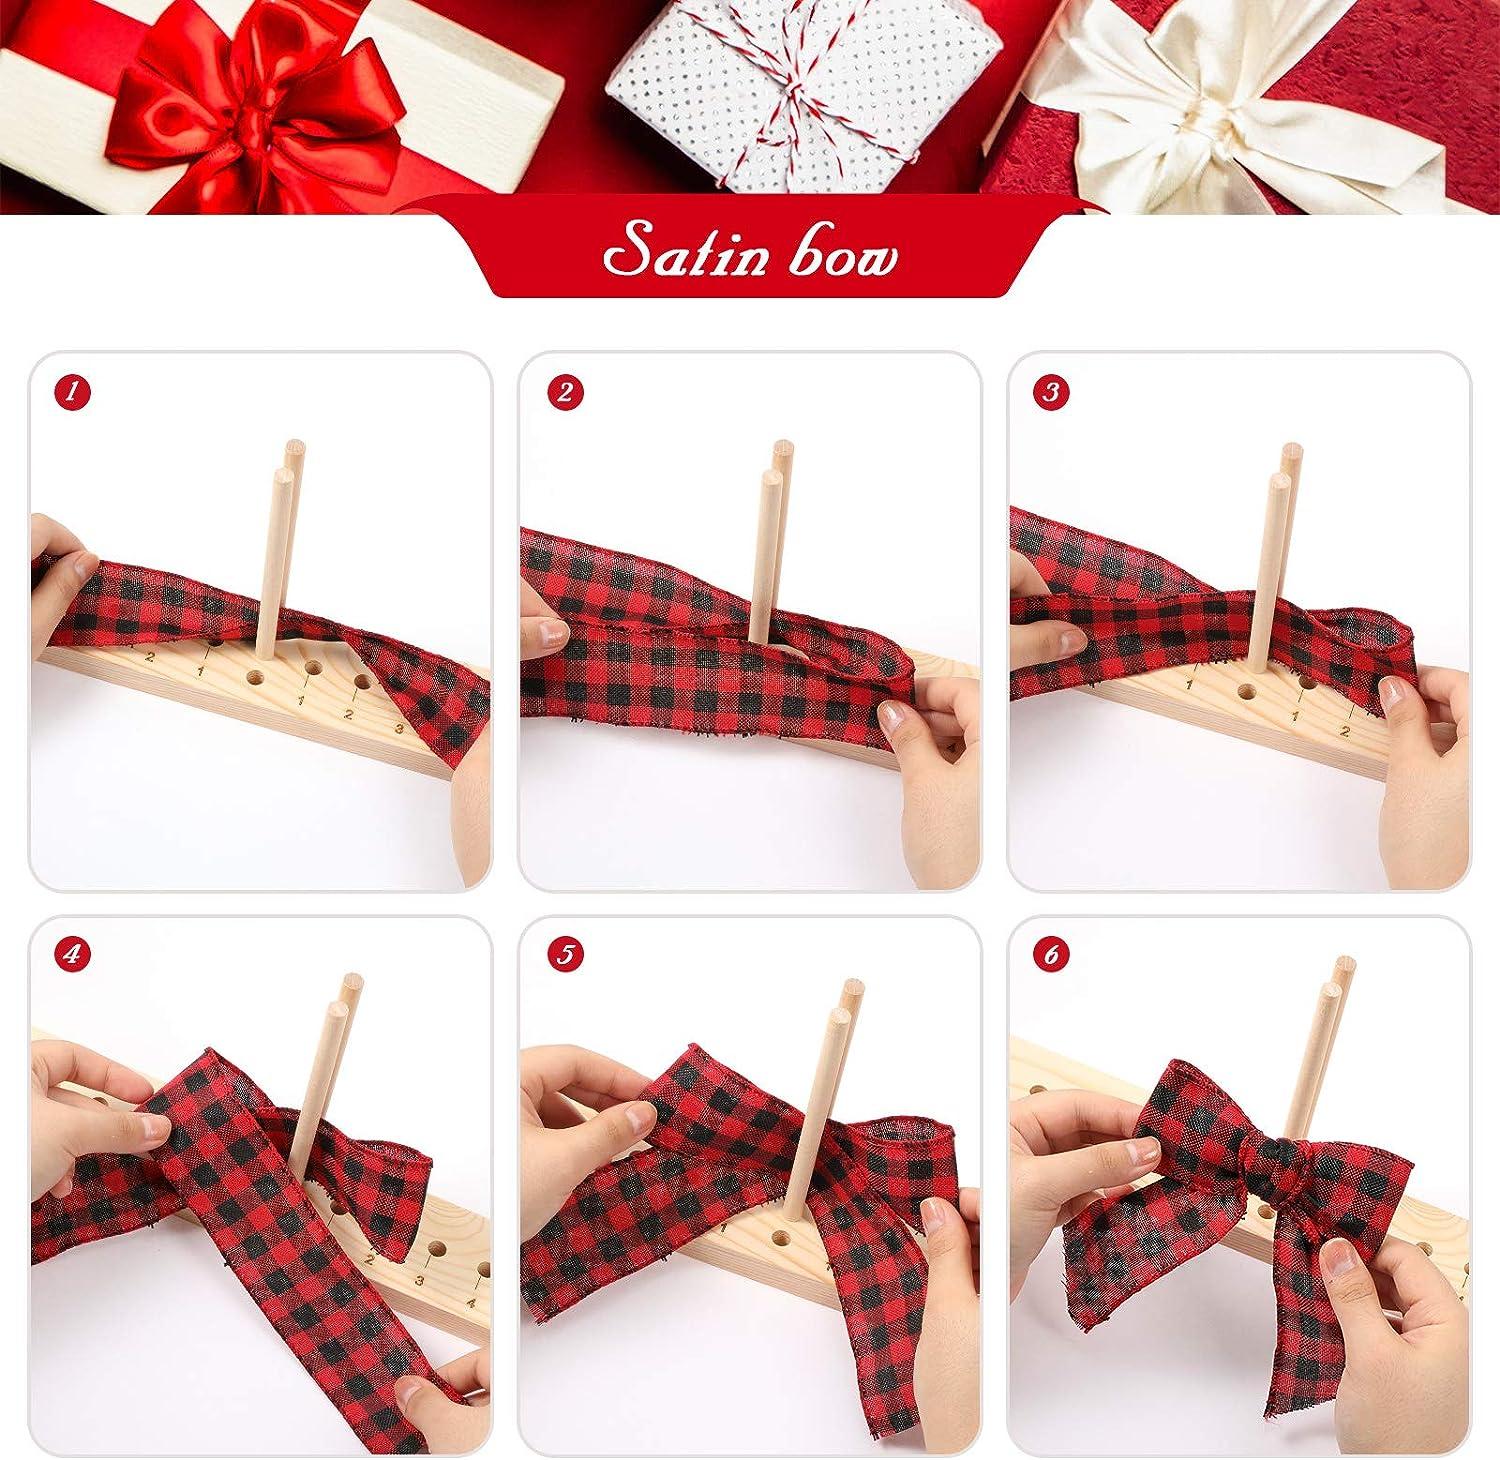 Wooden Bow Maker For Ribbon For Wreaths, Extended Ribbon Bow Maker Machine  Twist Ties For Making Gift Bows , Wreath Ribbons, Christmas Holiday Wreath